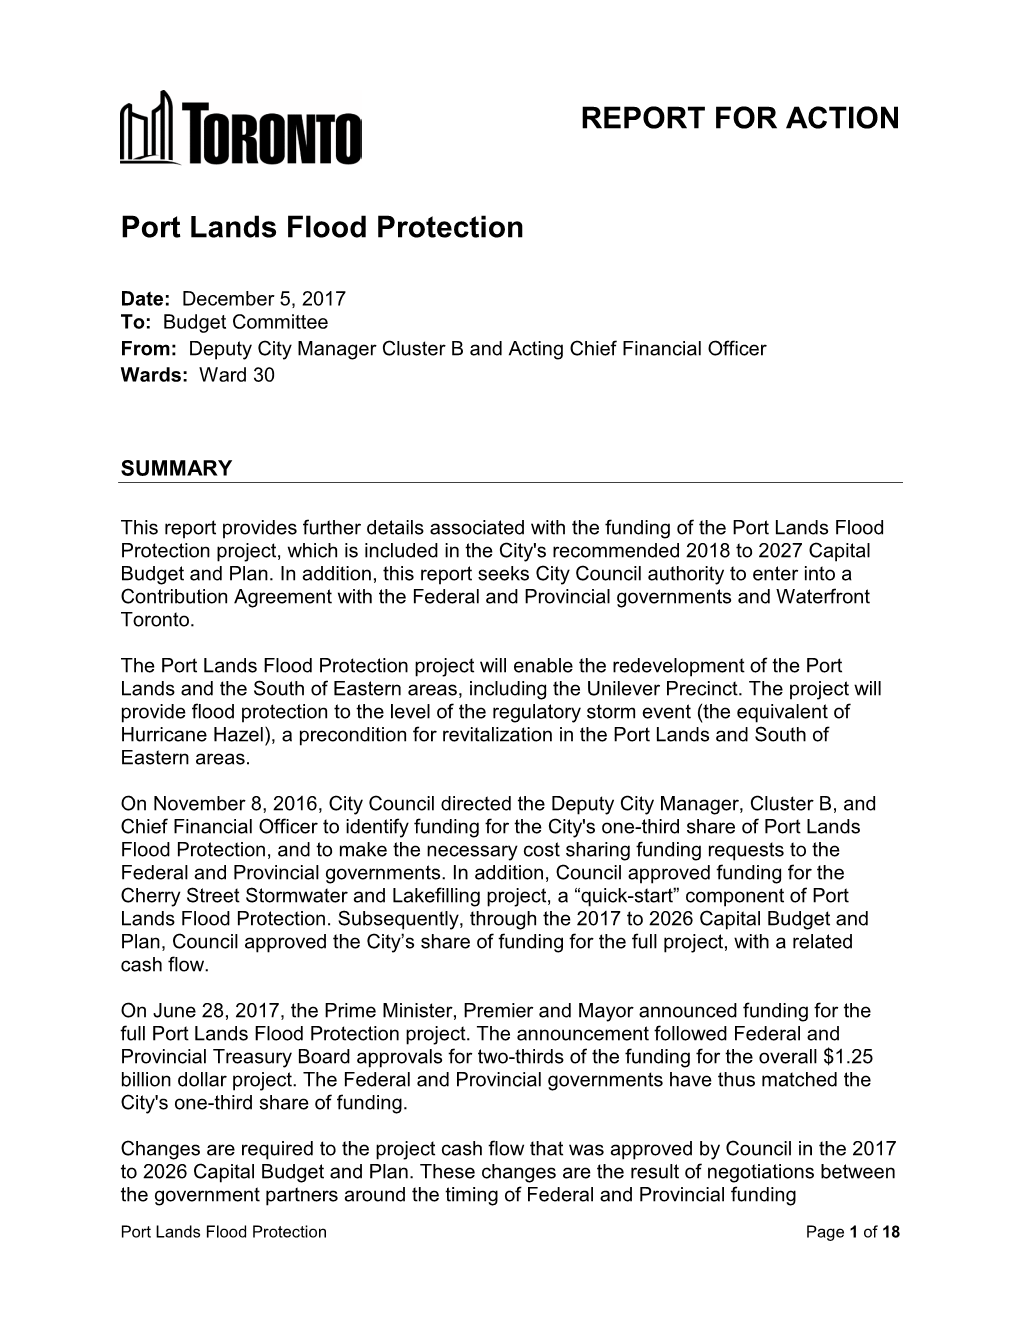 REPORT for ACTION Port Lands Flood Protection